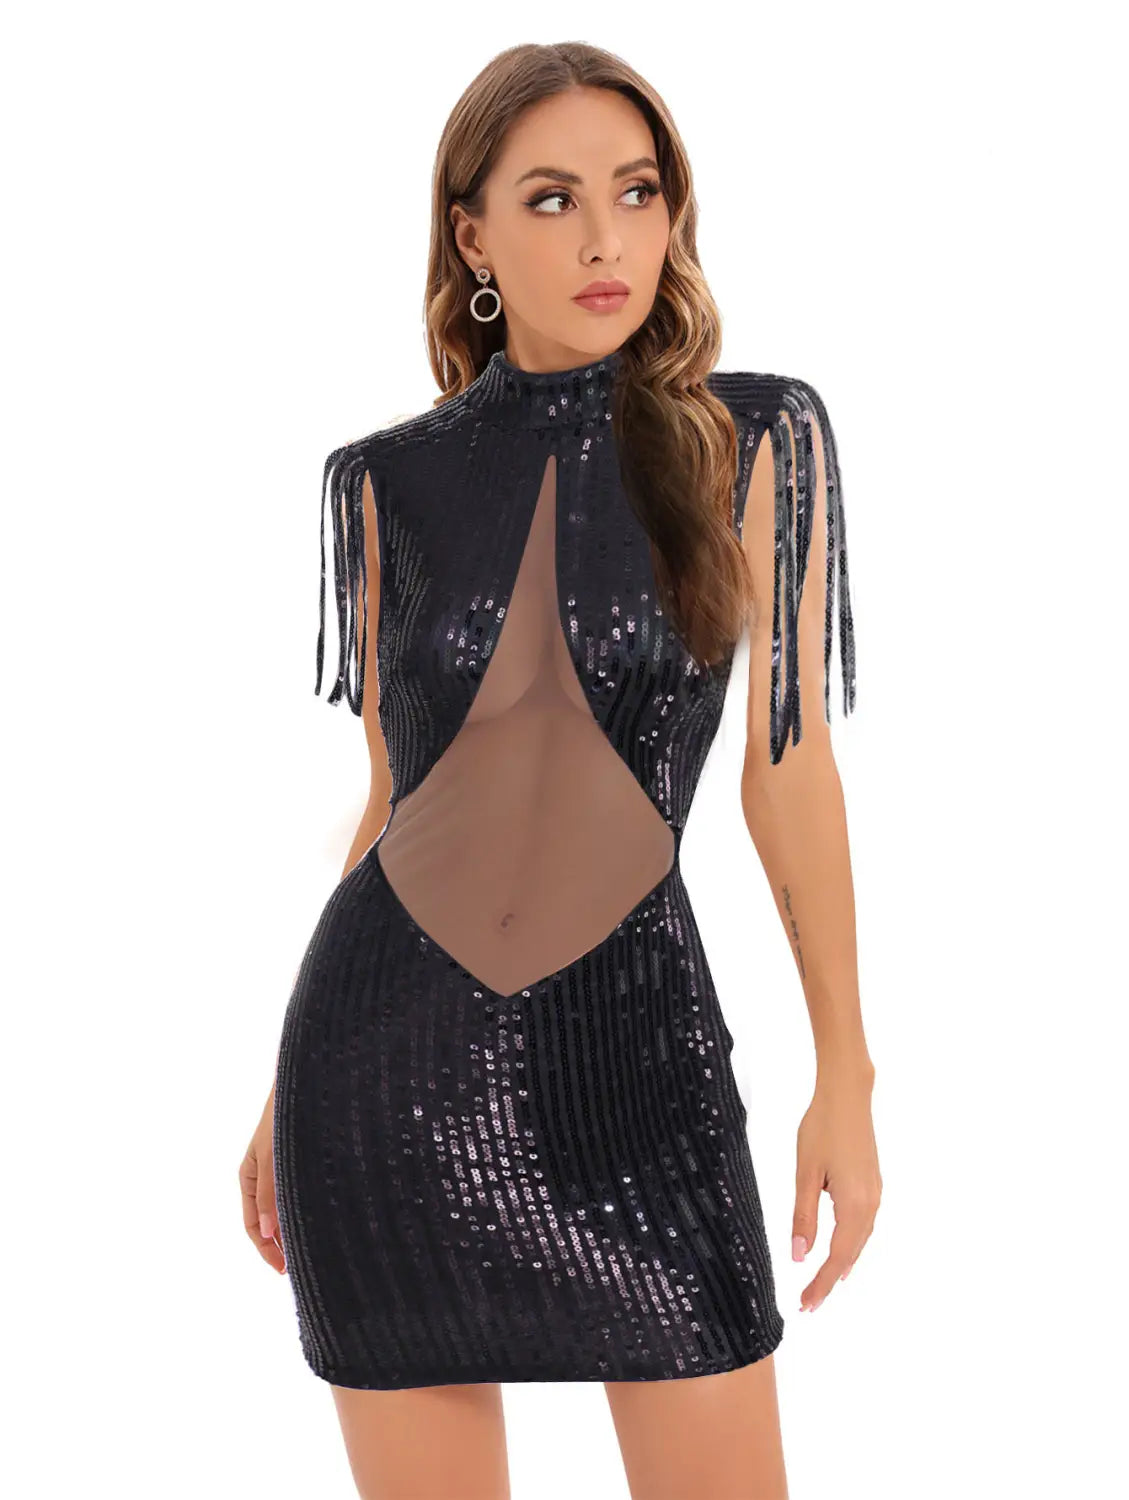 Glam Sequin Bodycon Dress - Sexy Elegance With Intricate Lace Details